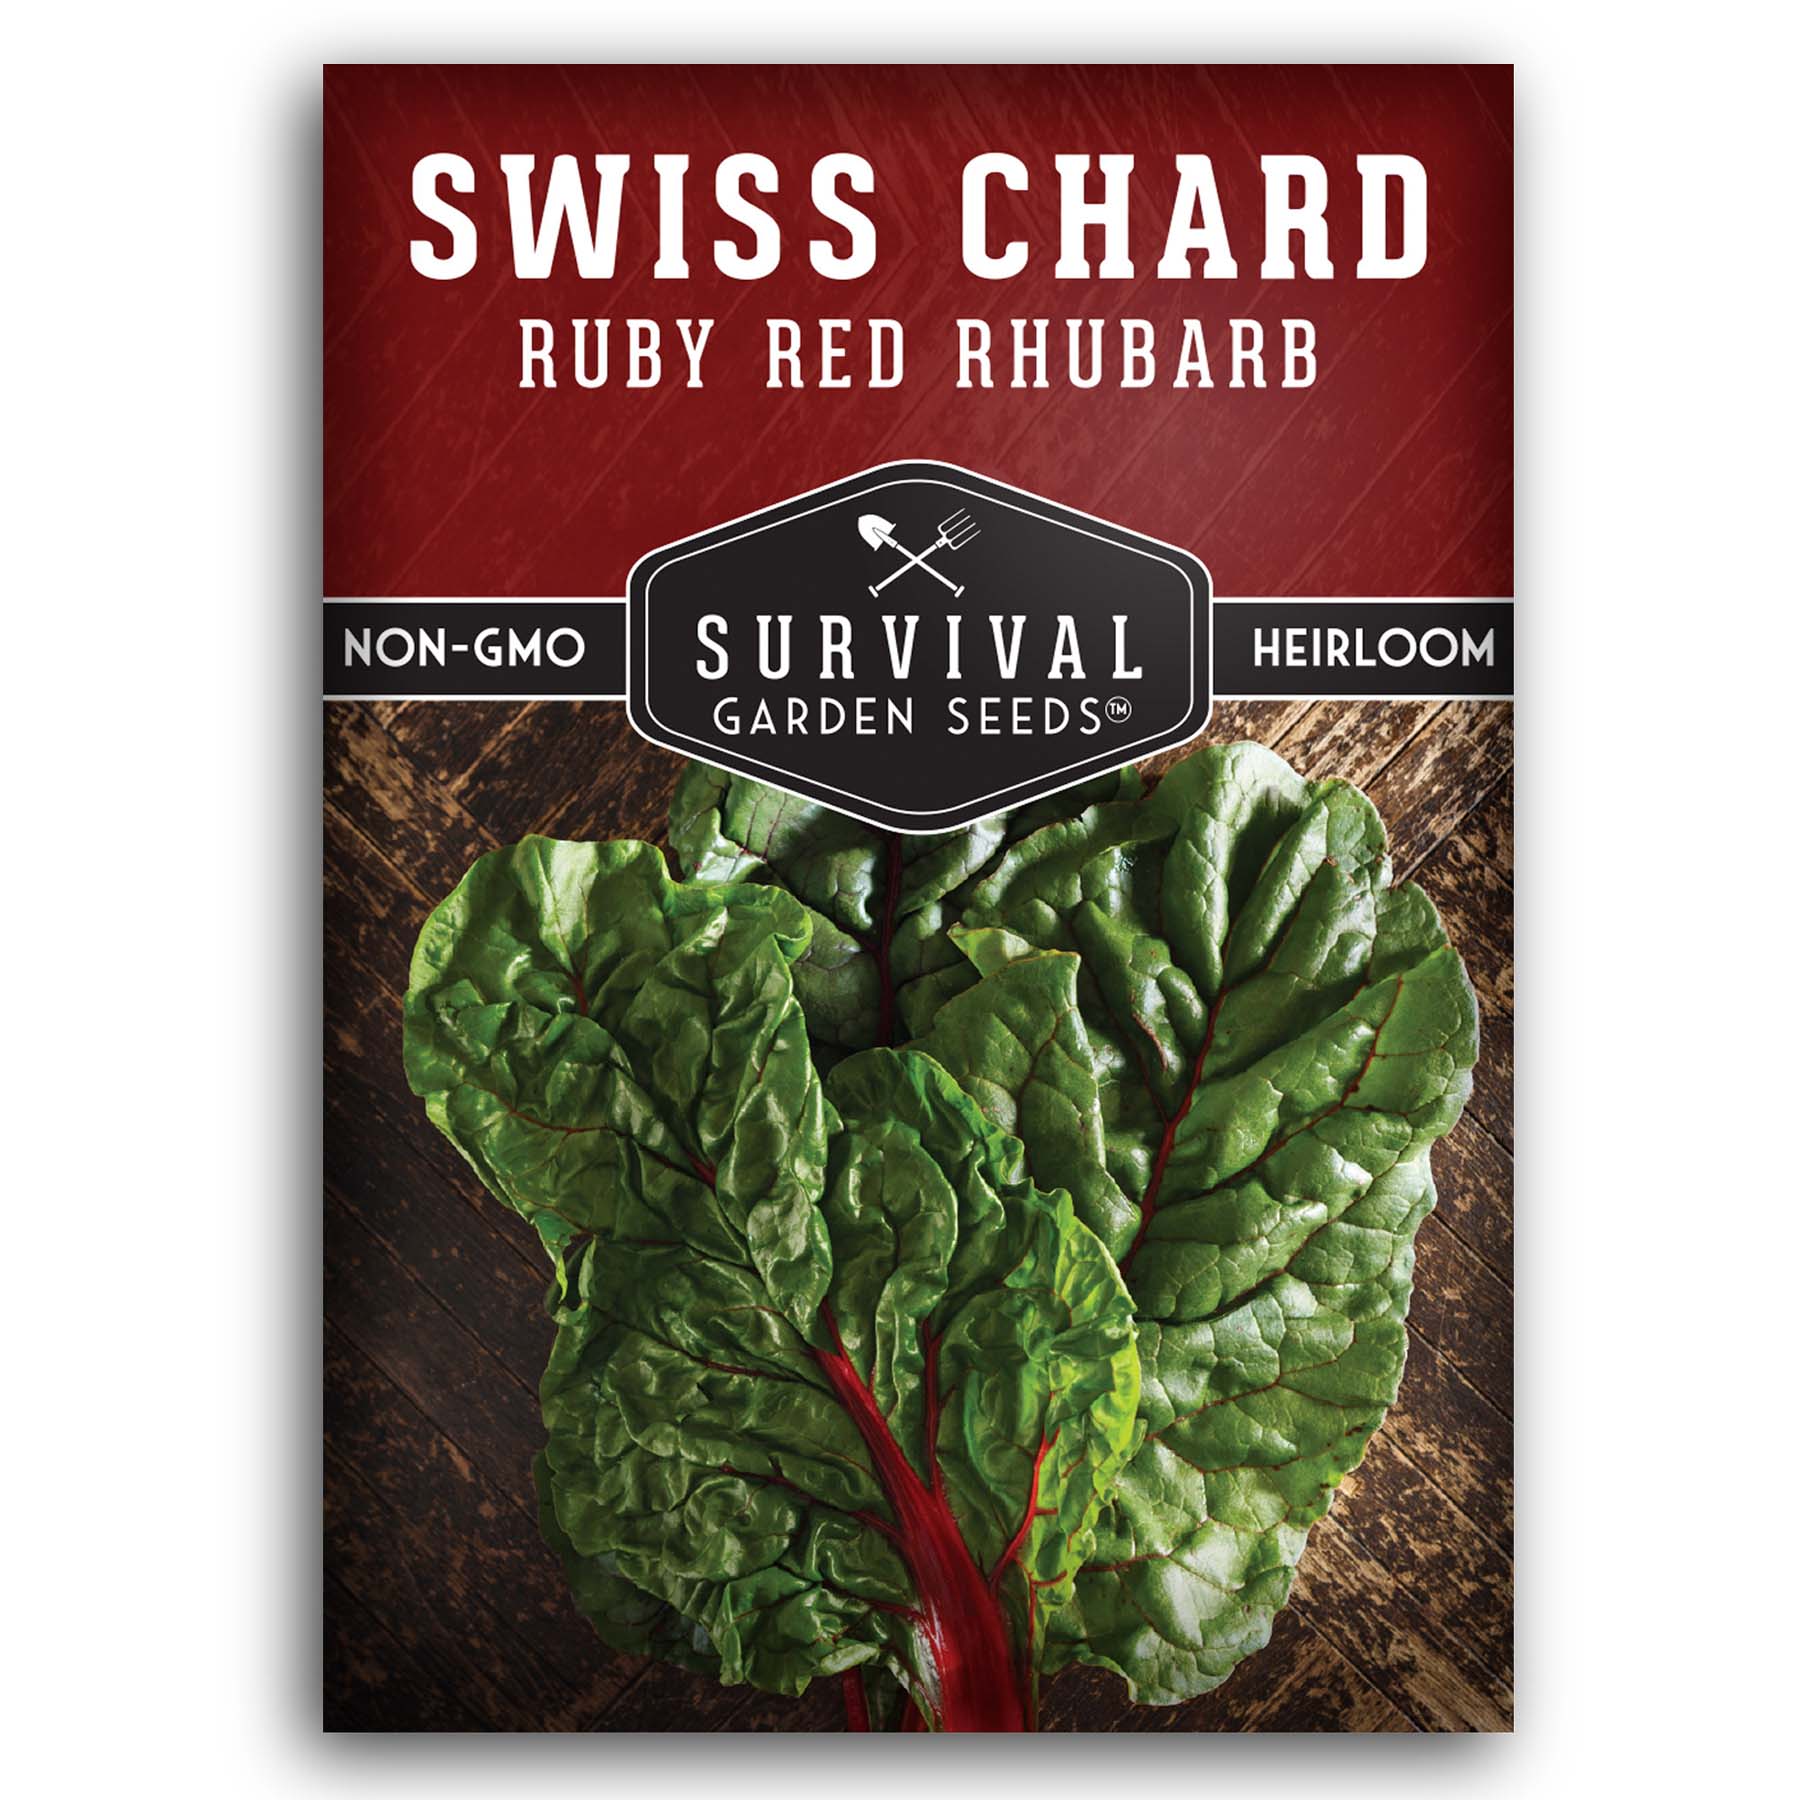 Ruby Red Rhubarb Swiss Chard seeds for planting